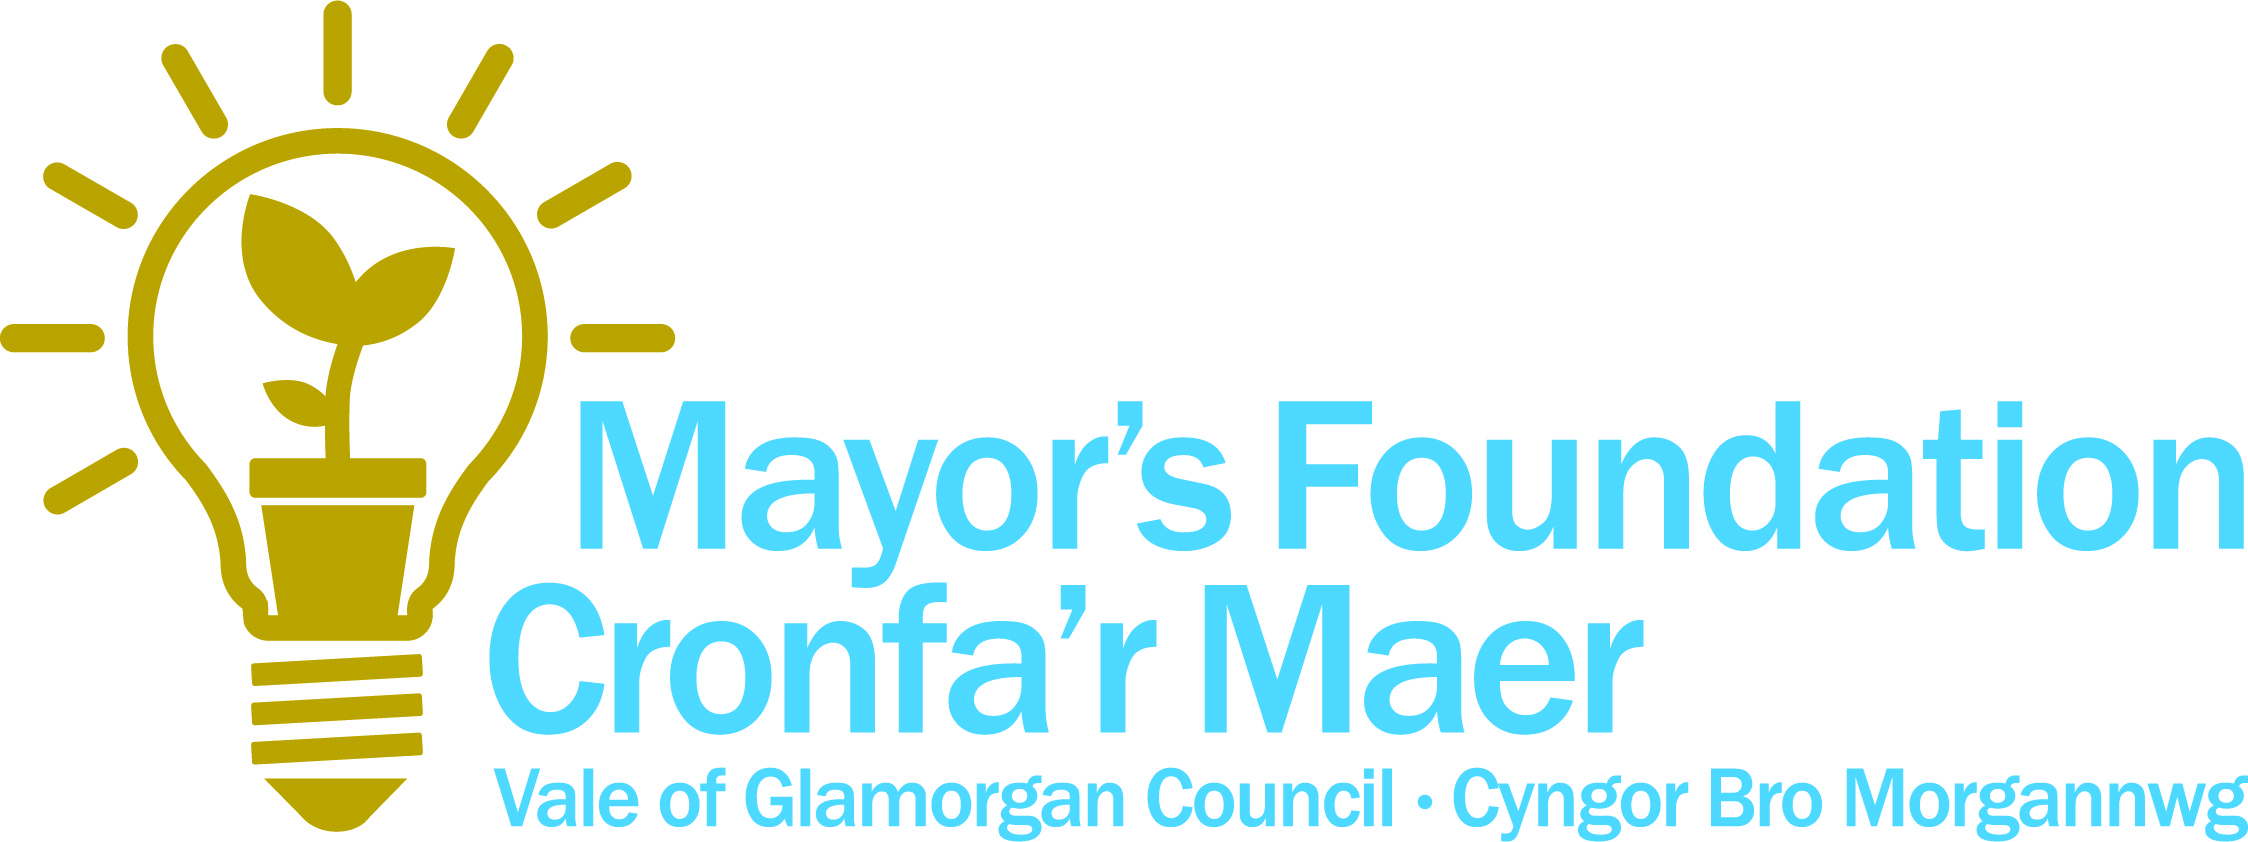 GUIDANCE NOTES WHAT IS THE MAYOR’S FOUNDATION GRANT FUND?